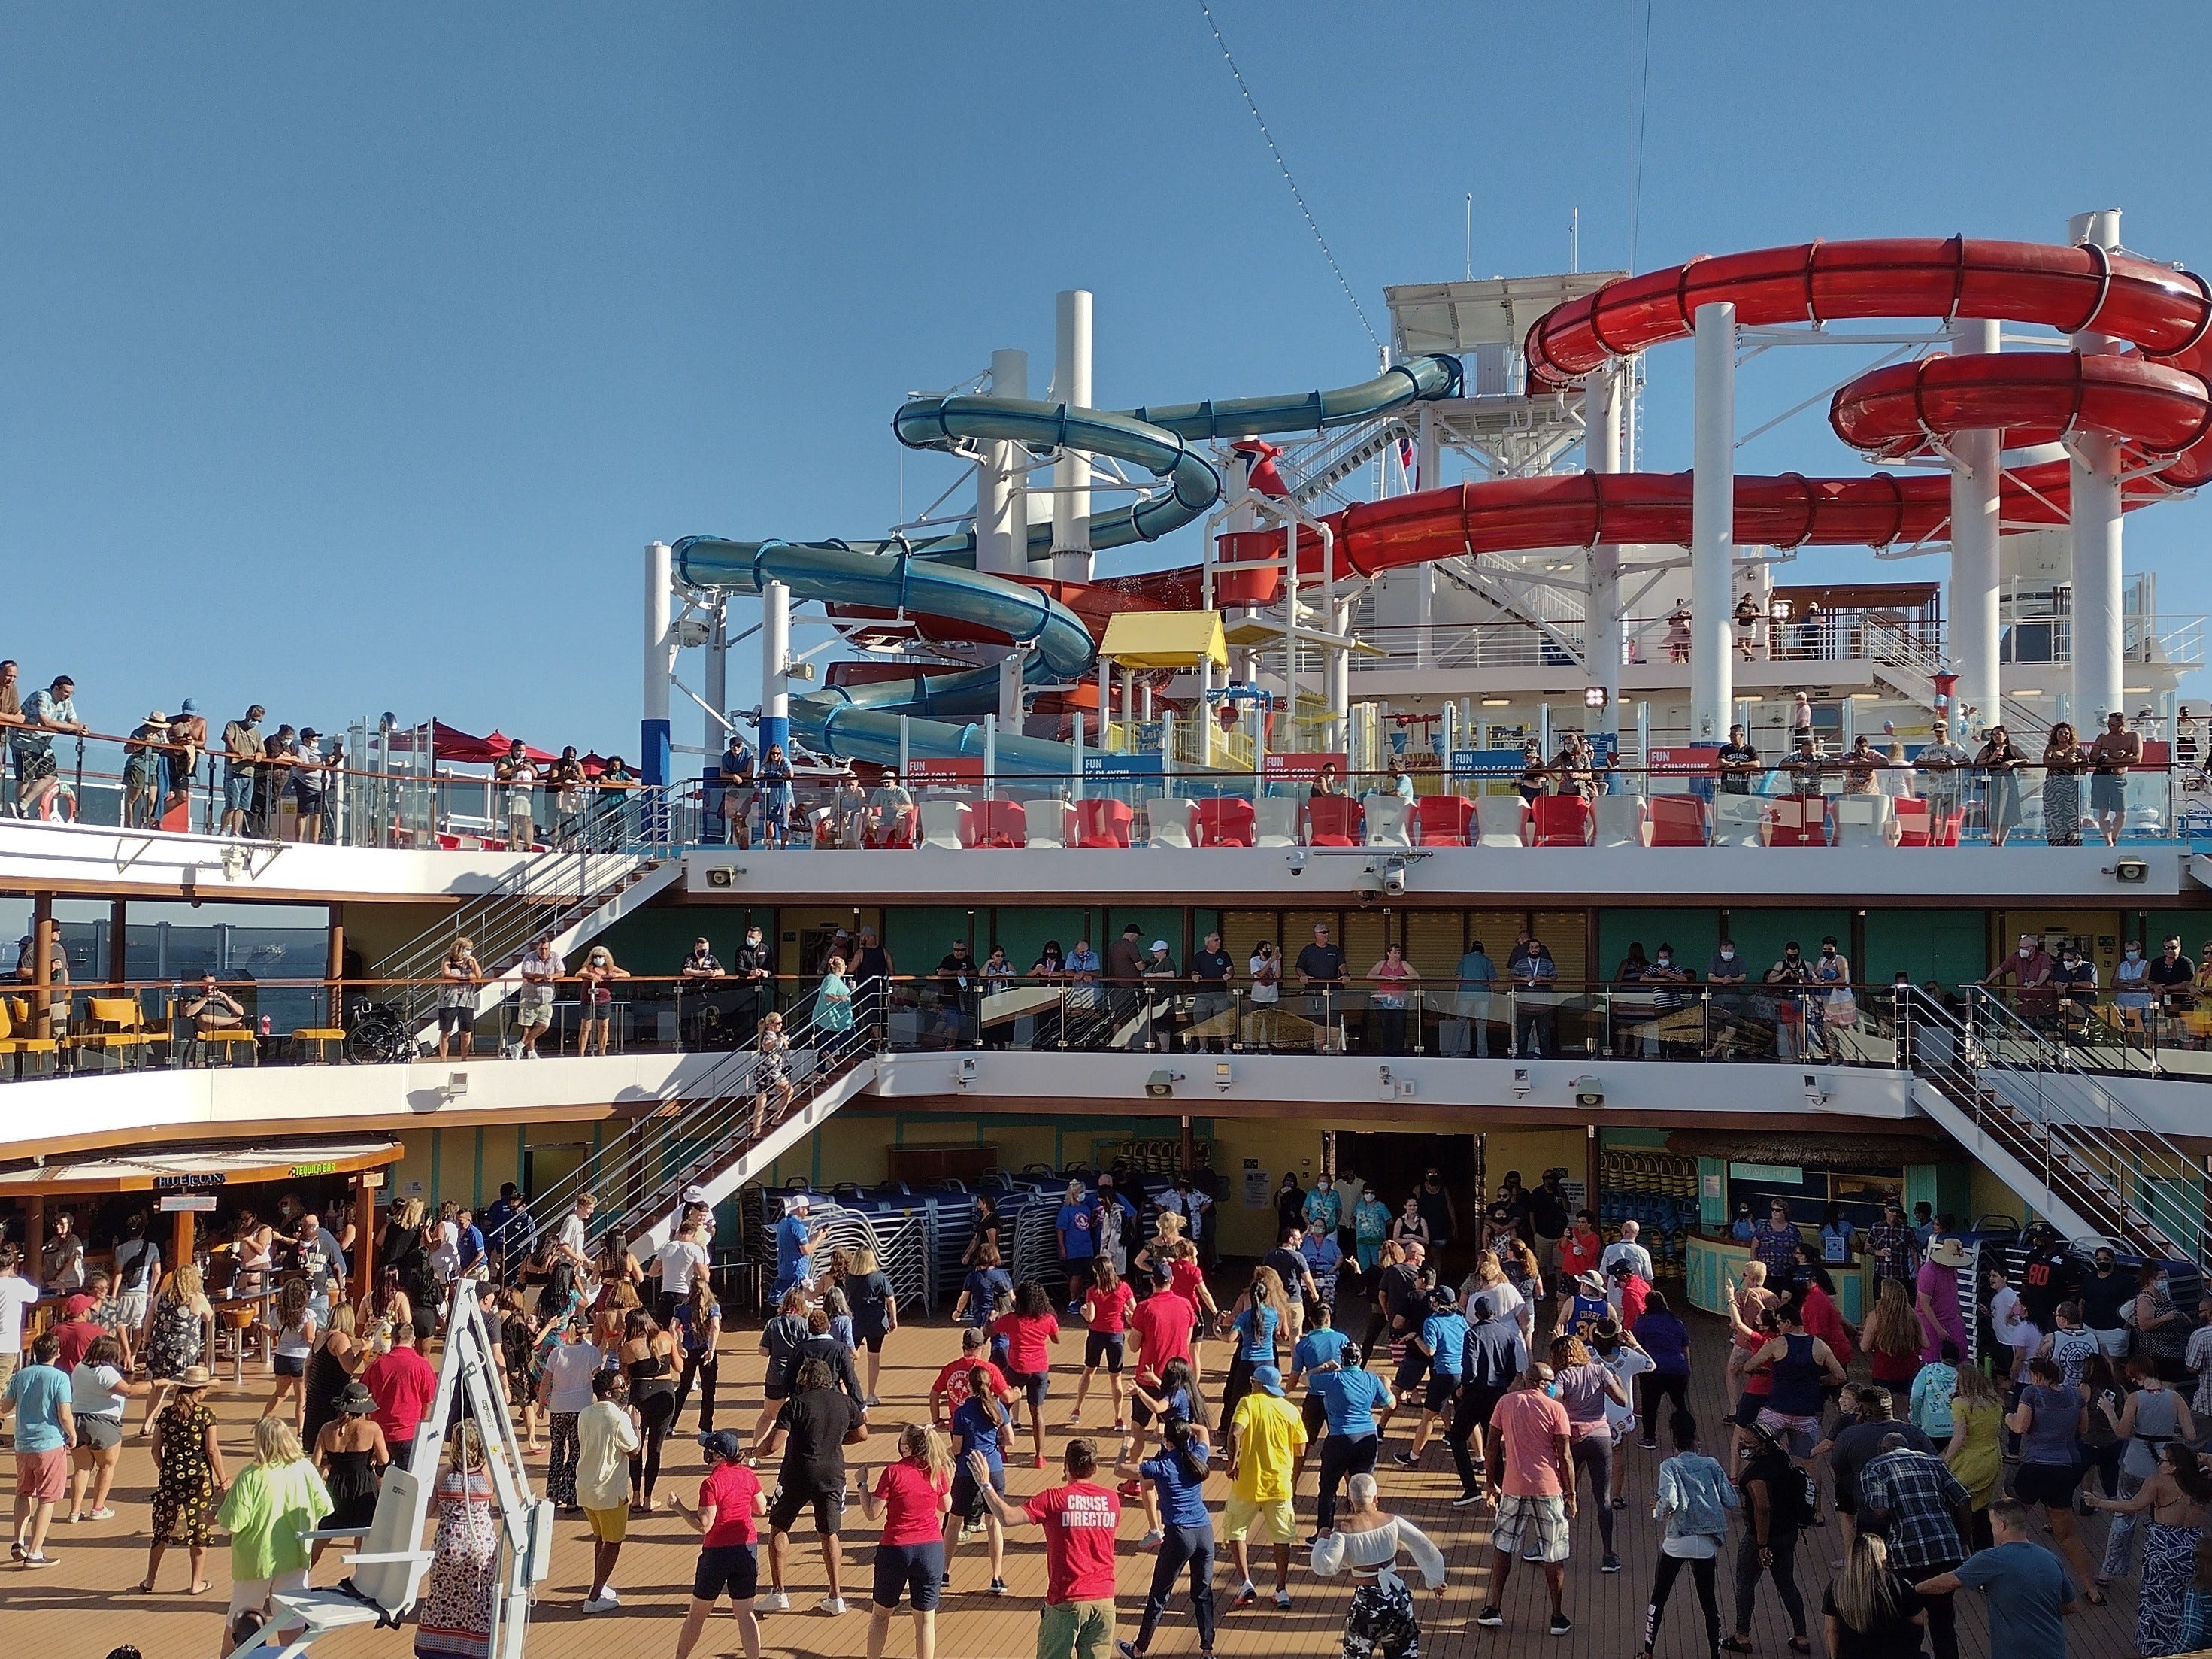 <p>Day and night, Carnival cruises are bursting so many fun things to do, it's no wonder they're called the "fun ships." From deck parties to ropes courses, waterslides to mini golf, I think it's impossible to be bored on a Carnival cruise.</p><p>But I think that also makes it all too easy to try and do too much, especially in one day. When first-timers try to take advantage of everything there is to do onboard, they might depart their cruise needing a vacation from their vacation.</p><p>This would be a shame as I've always found a cruise to be one of the most relaxing trips I can take. Sure, there is always something to do on Carnival, but I love that there is also an opportunity to slow down and disconnect, too.</p><p>To find balance in my day, I set time aside to review the activities I want to do: waterslides, mini putt, main stage entertainment, comedy shows, and so on. Then I make a little note to remind myself of these things while sailing so I don't forget, but I also don't live by a day planner. It's vacation, after all. </p><p>Instead, I try to visit each activity area of the ship and pick an afternoon or evening activity for each day that I don't want to miss. The rest of the time, I just relax and enjoy a salty breeze in the sun by the pool.</p>